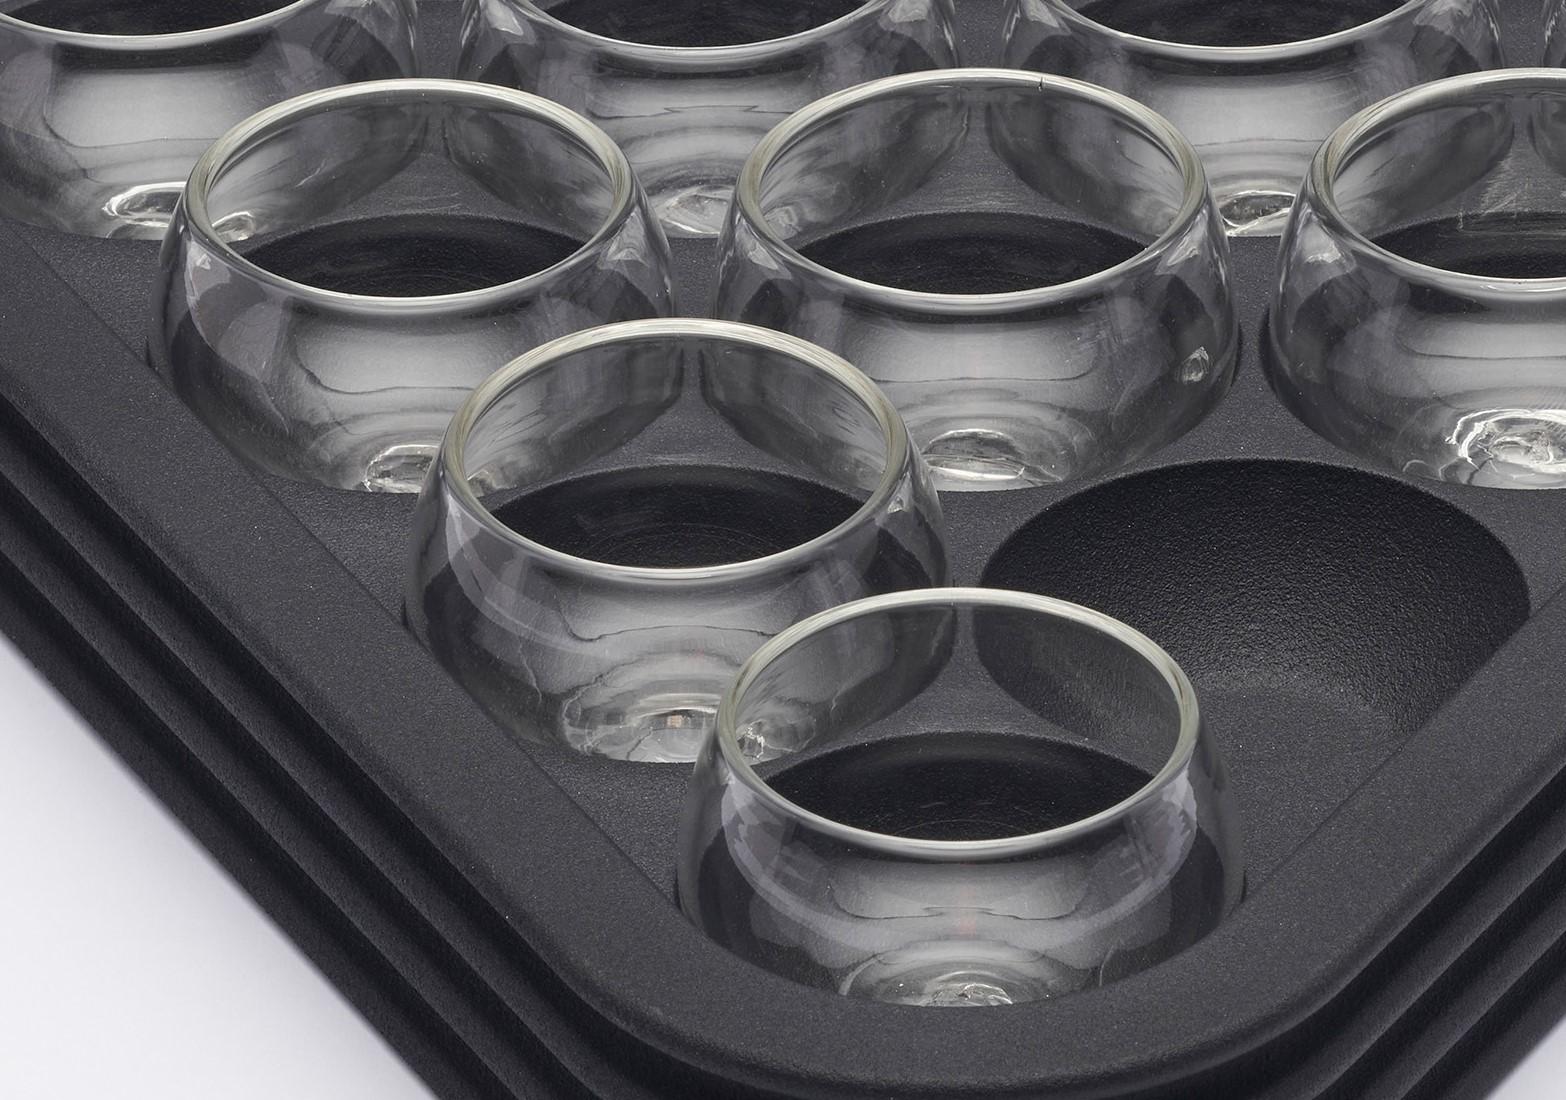 Hand-Crafted Snooker shot glasses and tray from the Alexandre Arrechea SoShiro collaboration For Sale